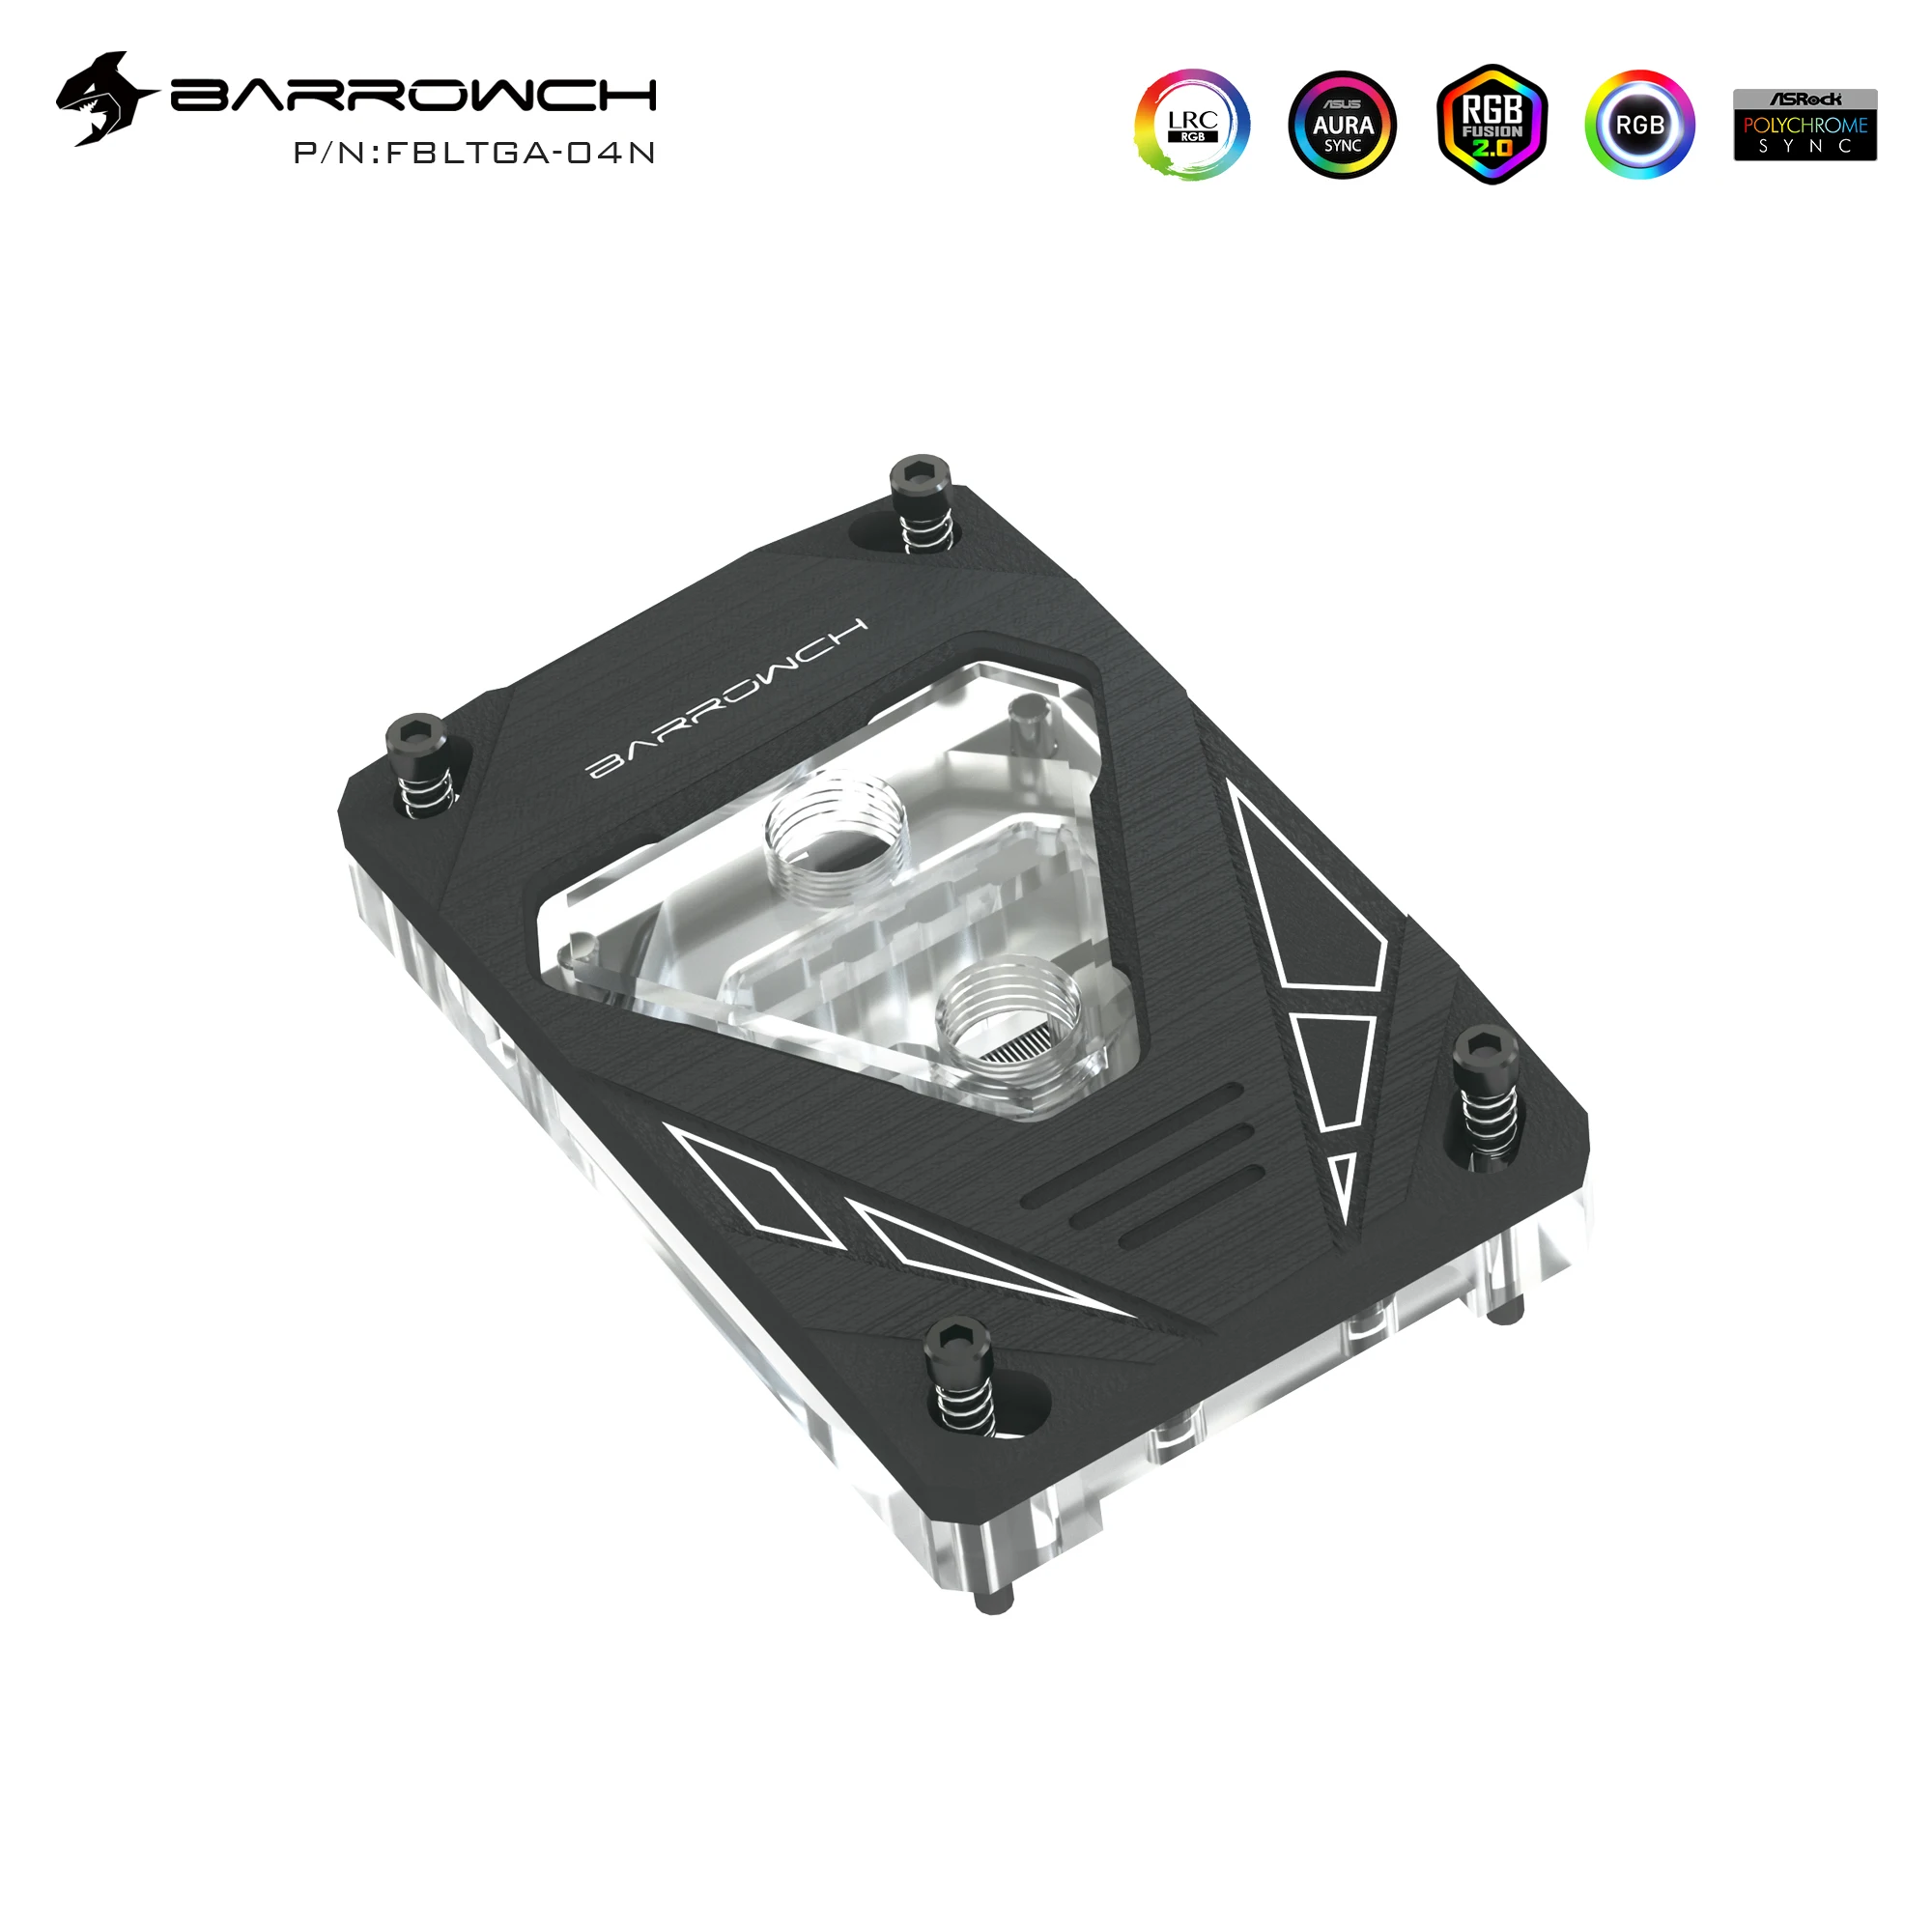 

BARROWCH CPU Cooler For AMD RYZEN AM4 ,AM3, Water Cooling 5V Water Block ,Seller Highly Recommend, FBLTGA-04N pc parts